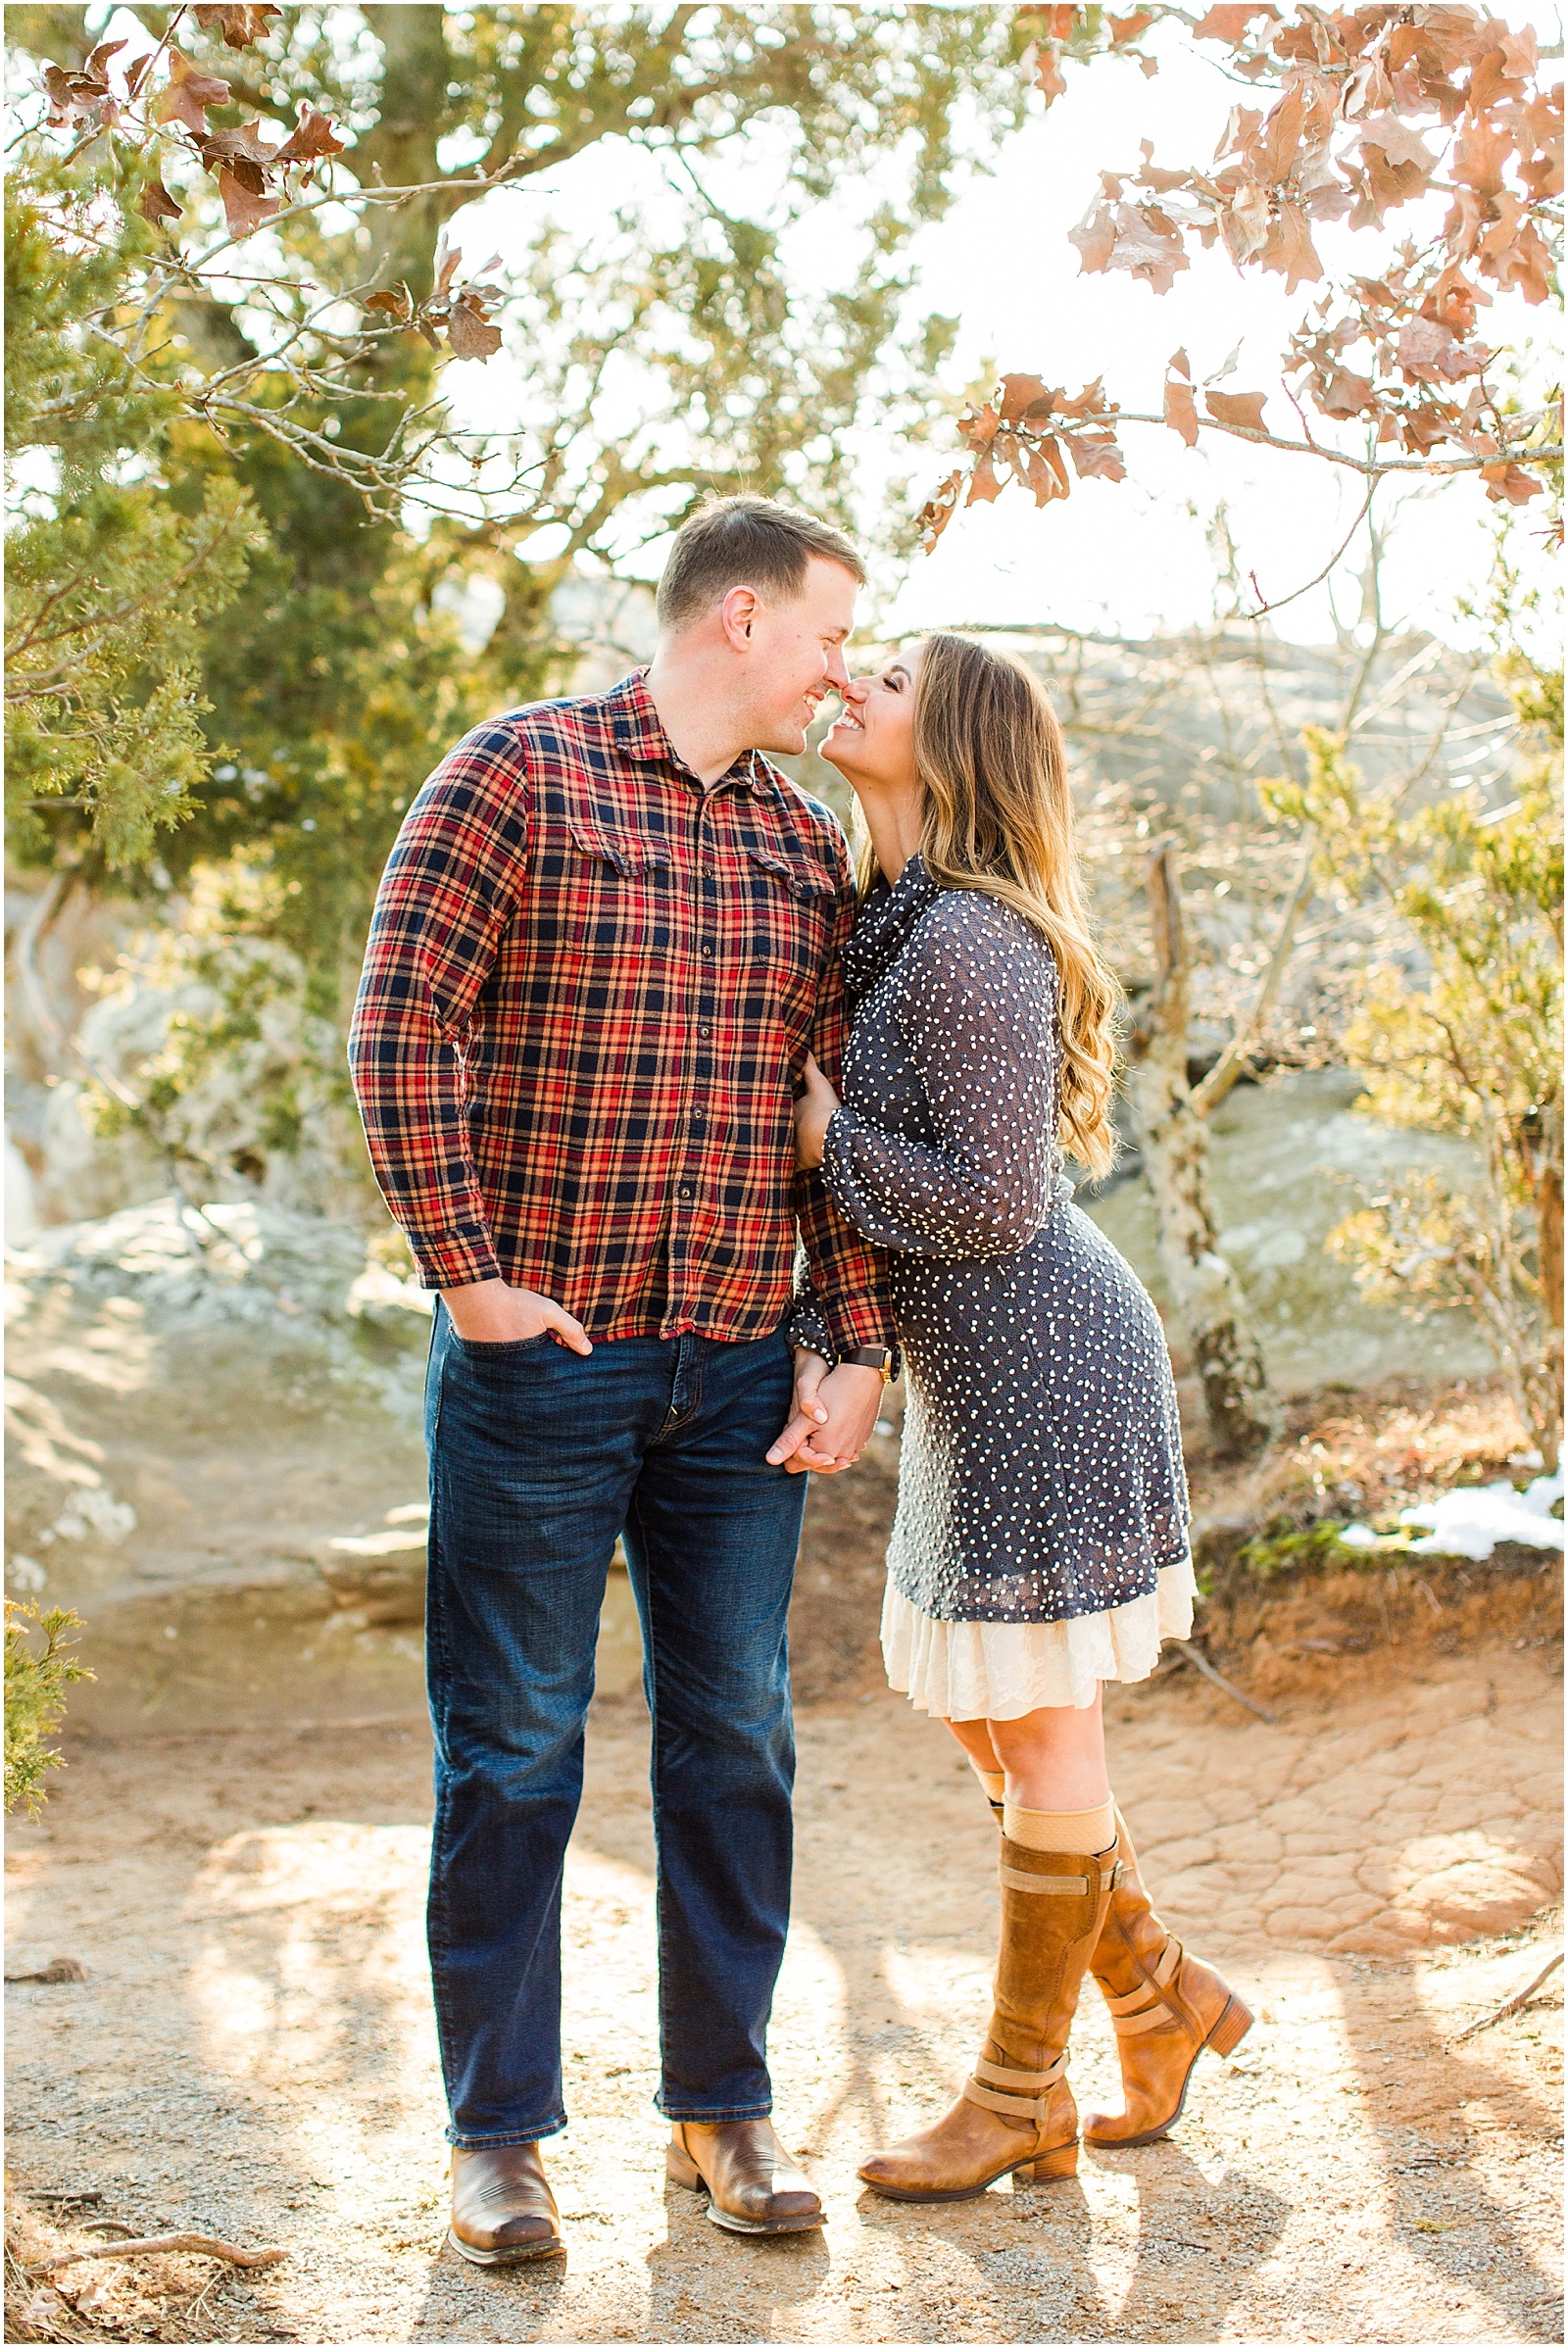 A Sunny Garden of the Gods Engagement Session | Shiloh and Lee | Bret and Brandie Photography006.jpg